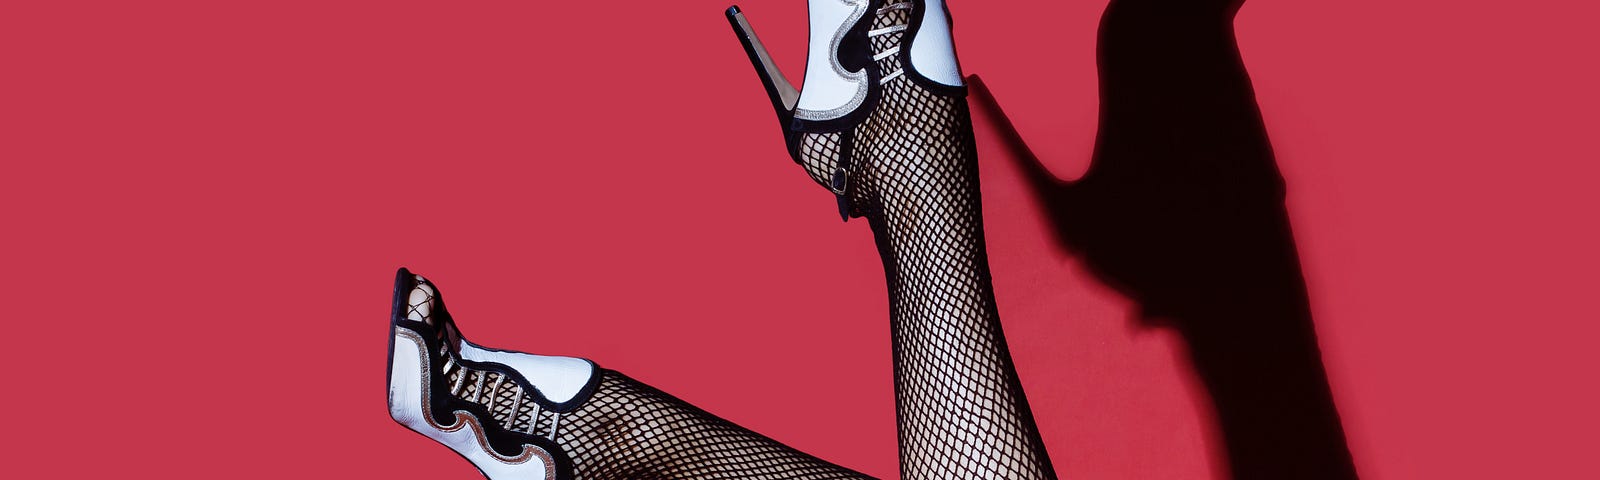 Legs in stockings and pumps kicking in the air against a red background.